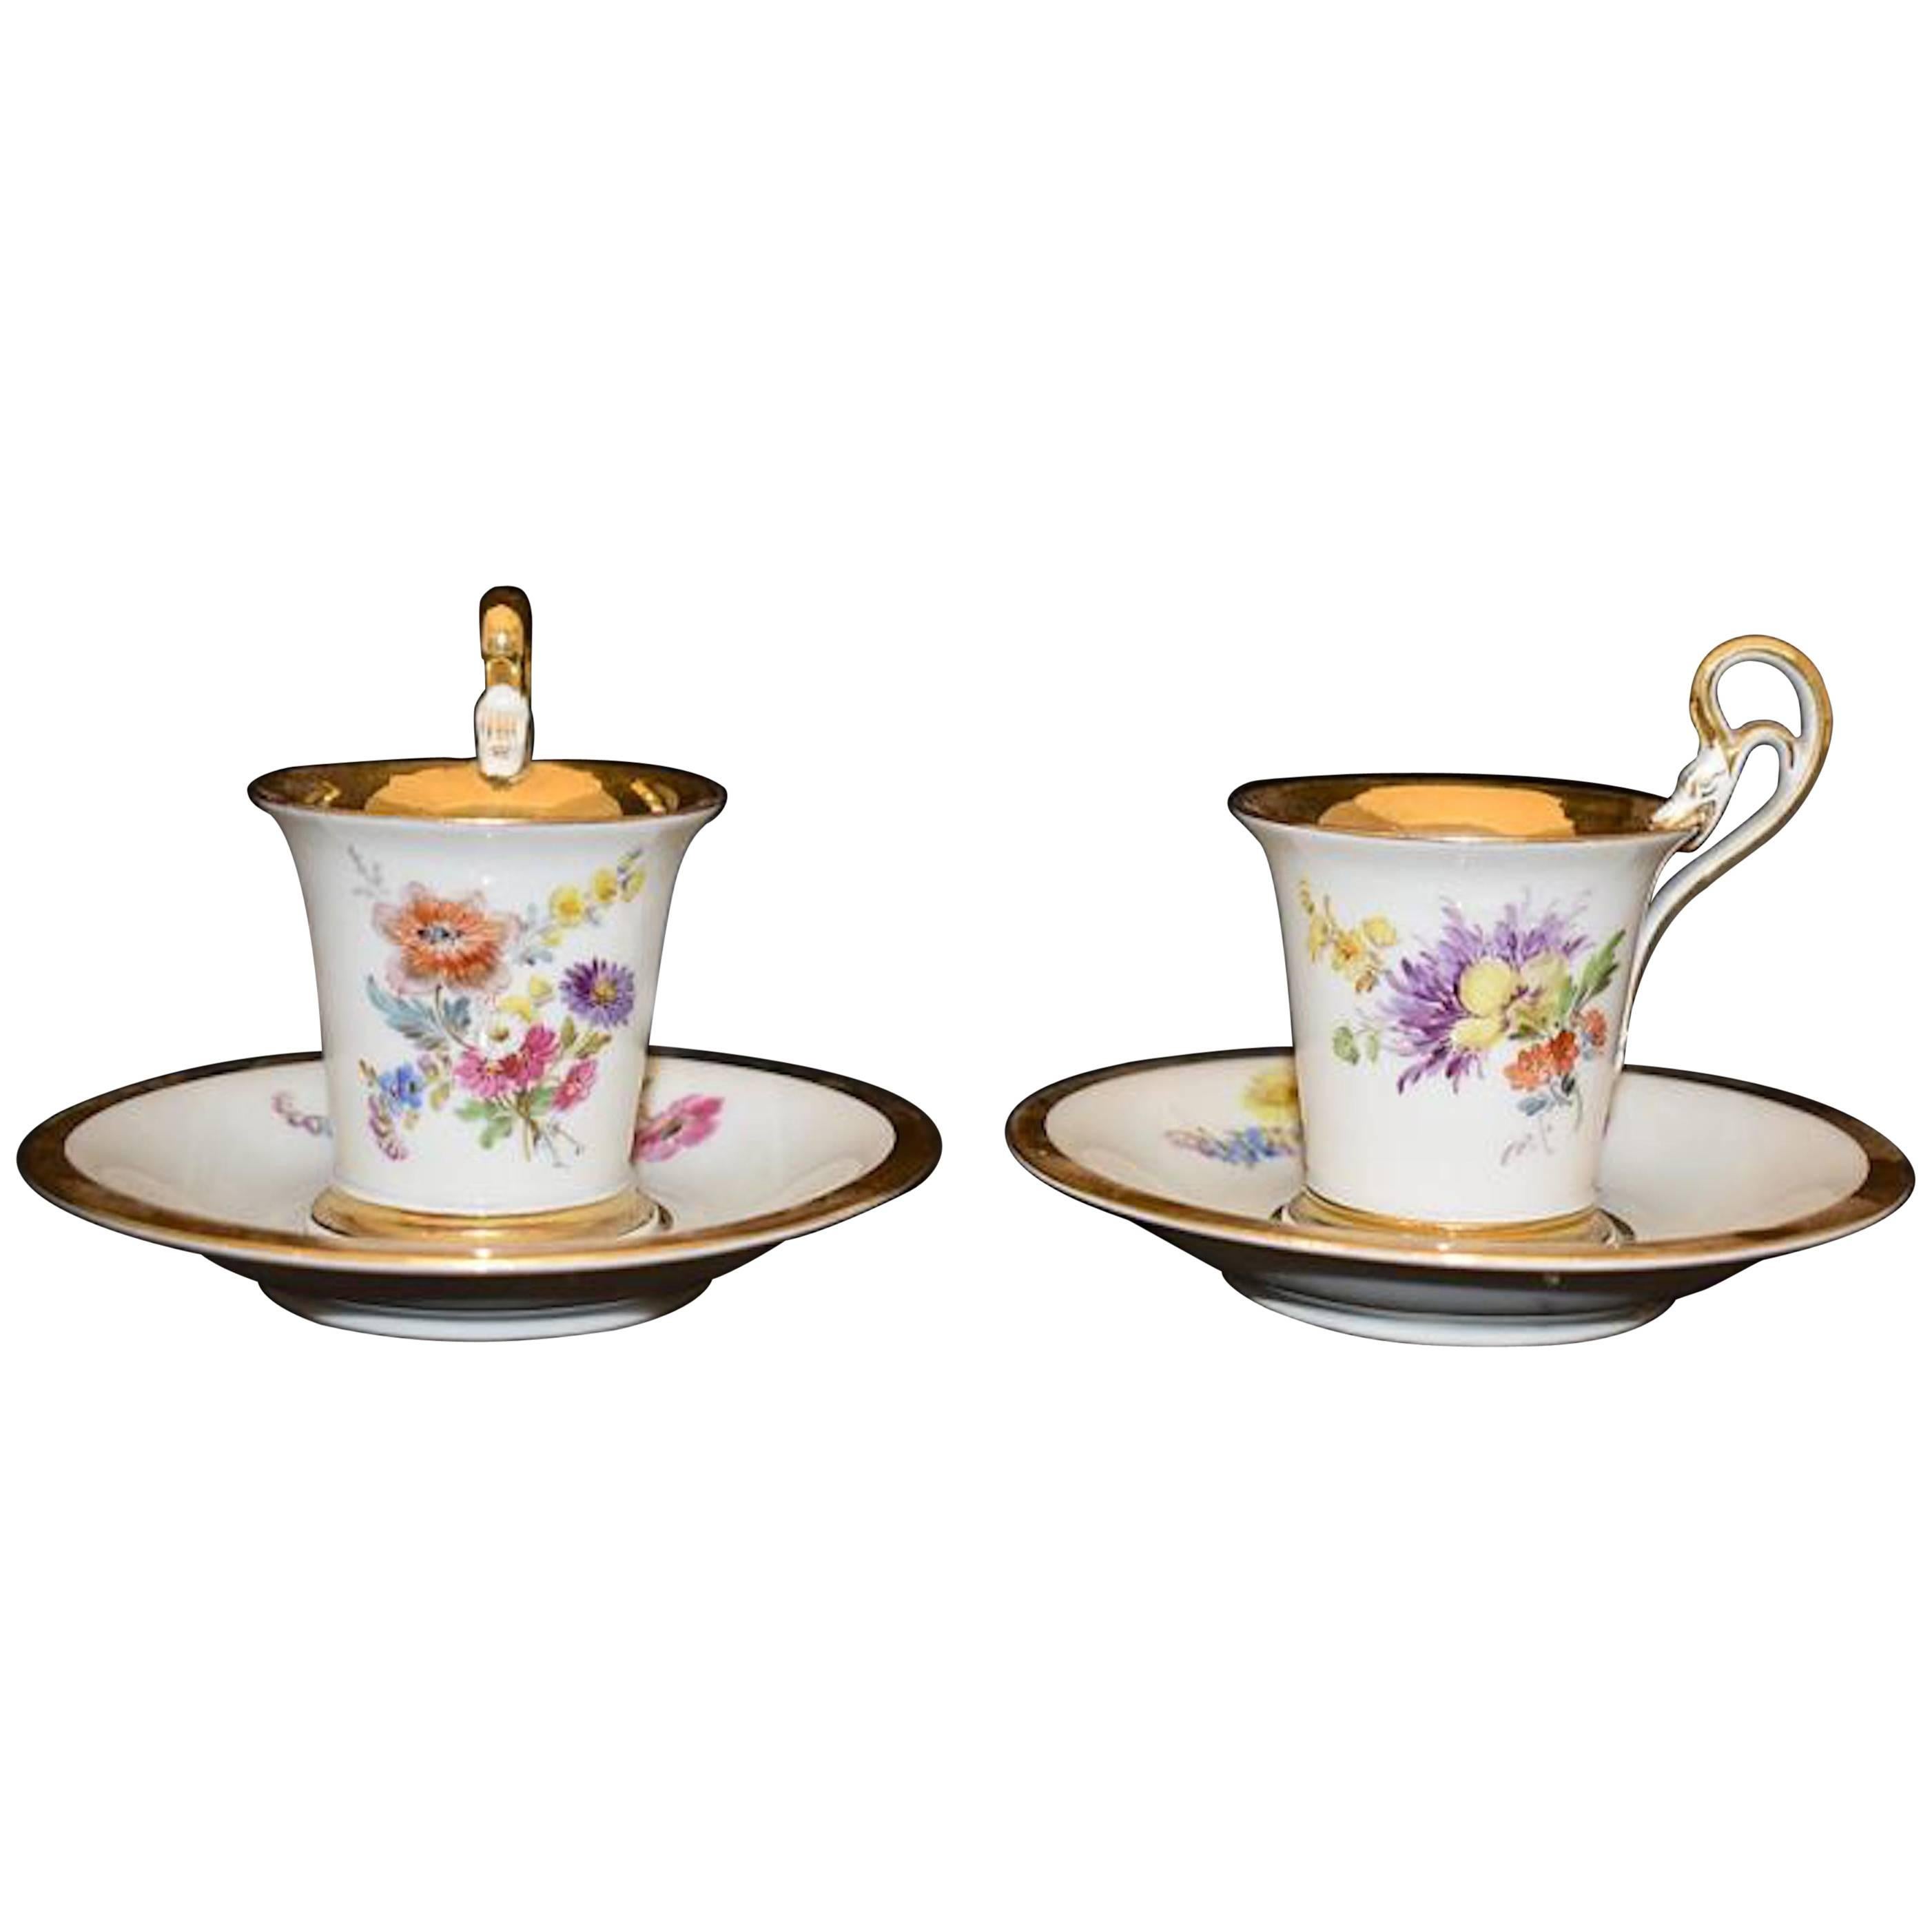 Pair of Meissen Demitasse Cups and Saucers